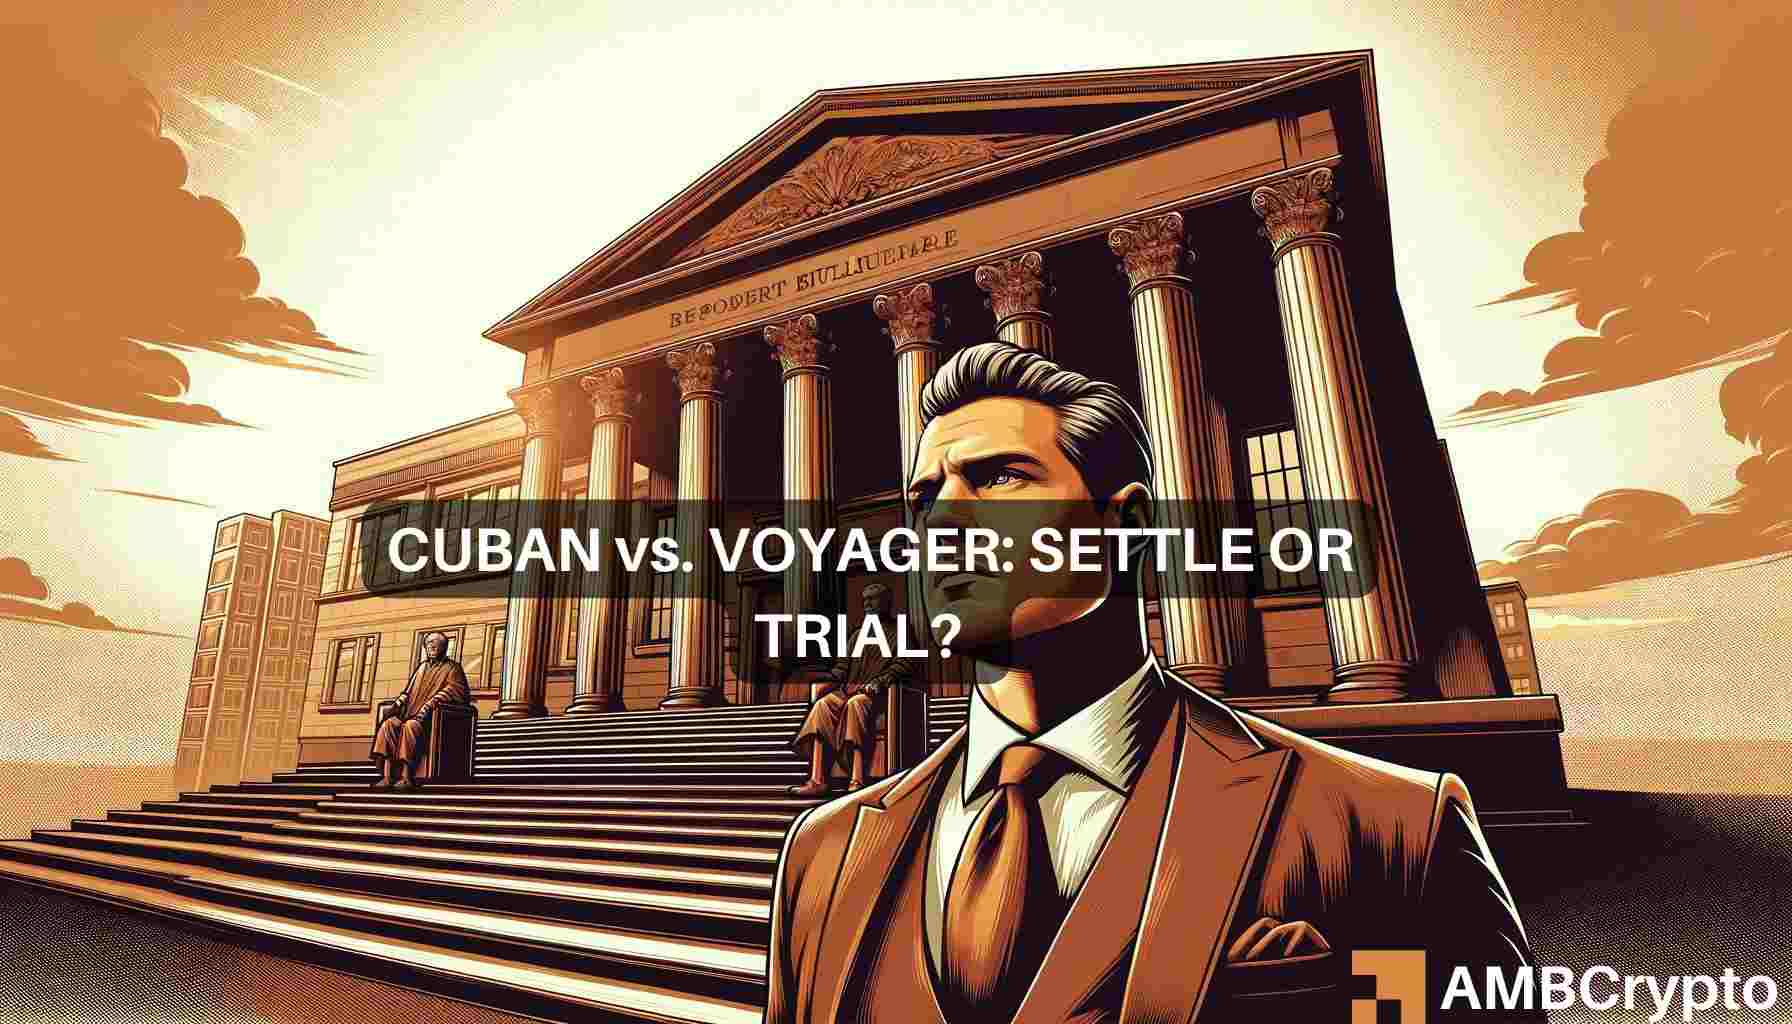 Voyager crypto lawsuit: Mark Cuban can face trial after missing settlement talks